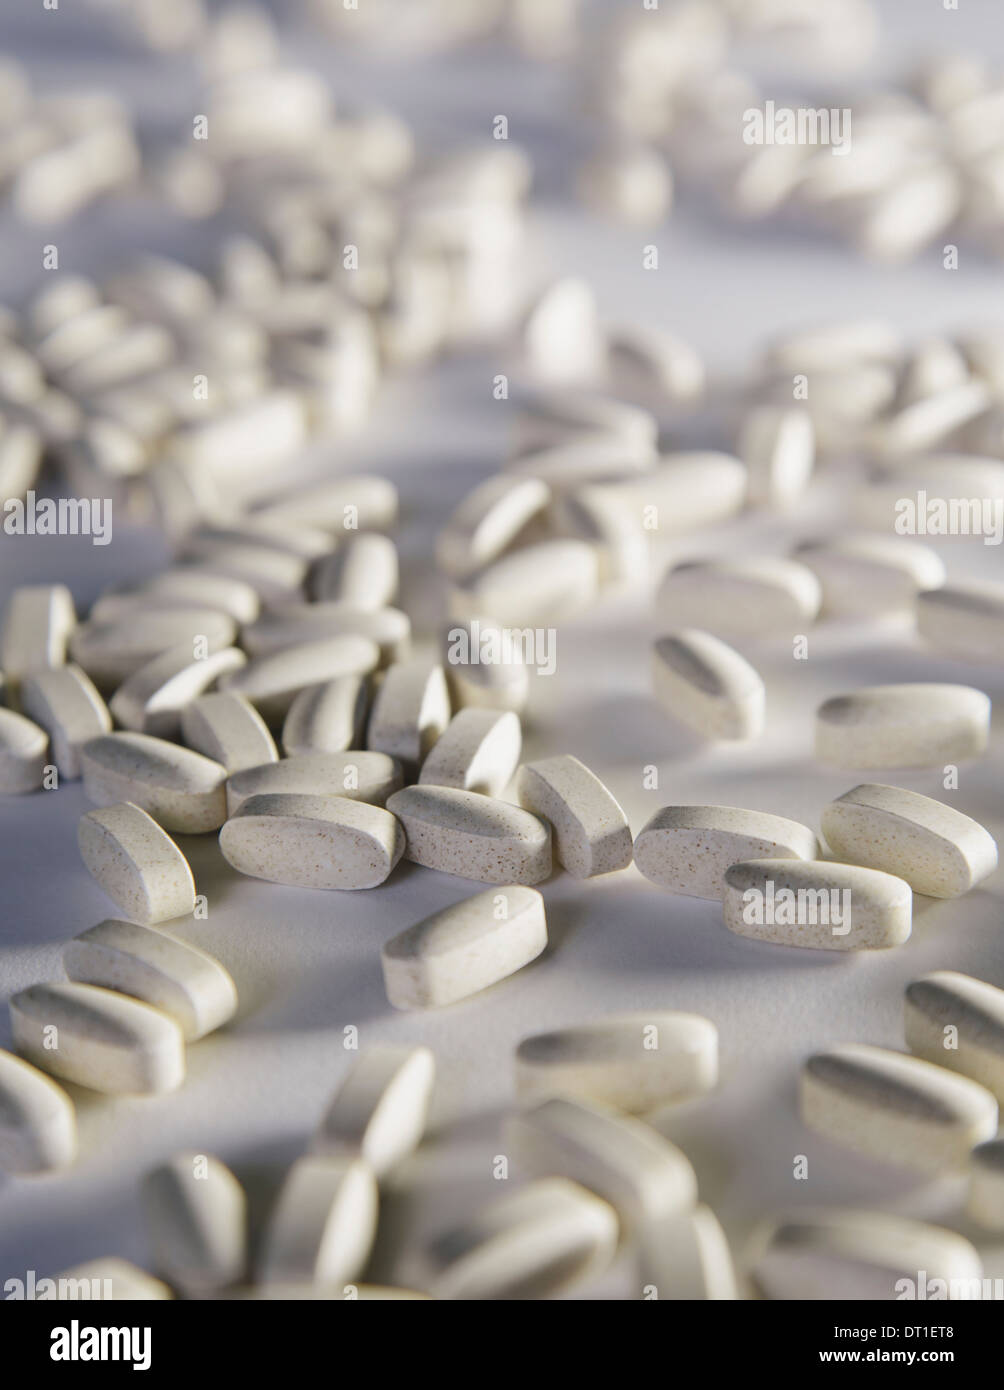 Vitamin C supplements white oval tablets taken for health reasons Spread out on a white background Stock Photo